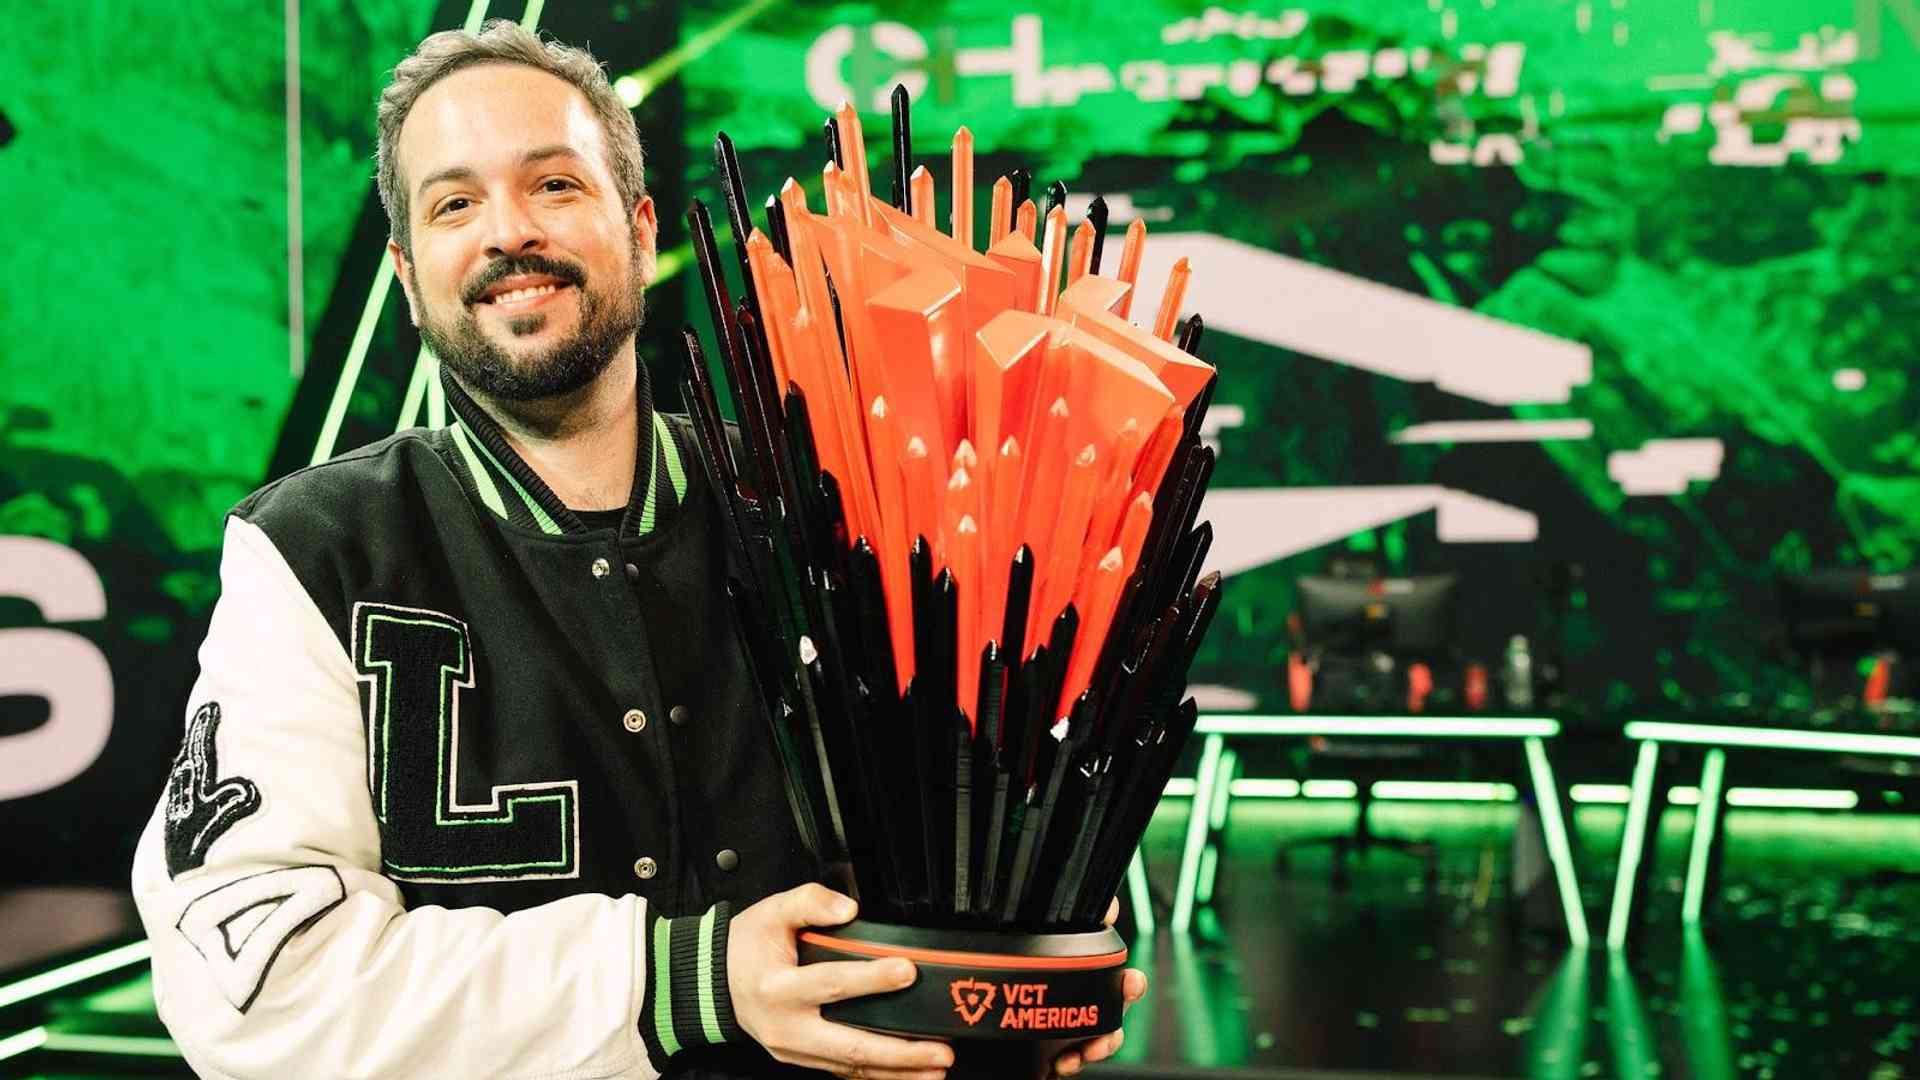 LOUD taking home VALORANT Champions trophy to Brazil